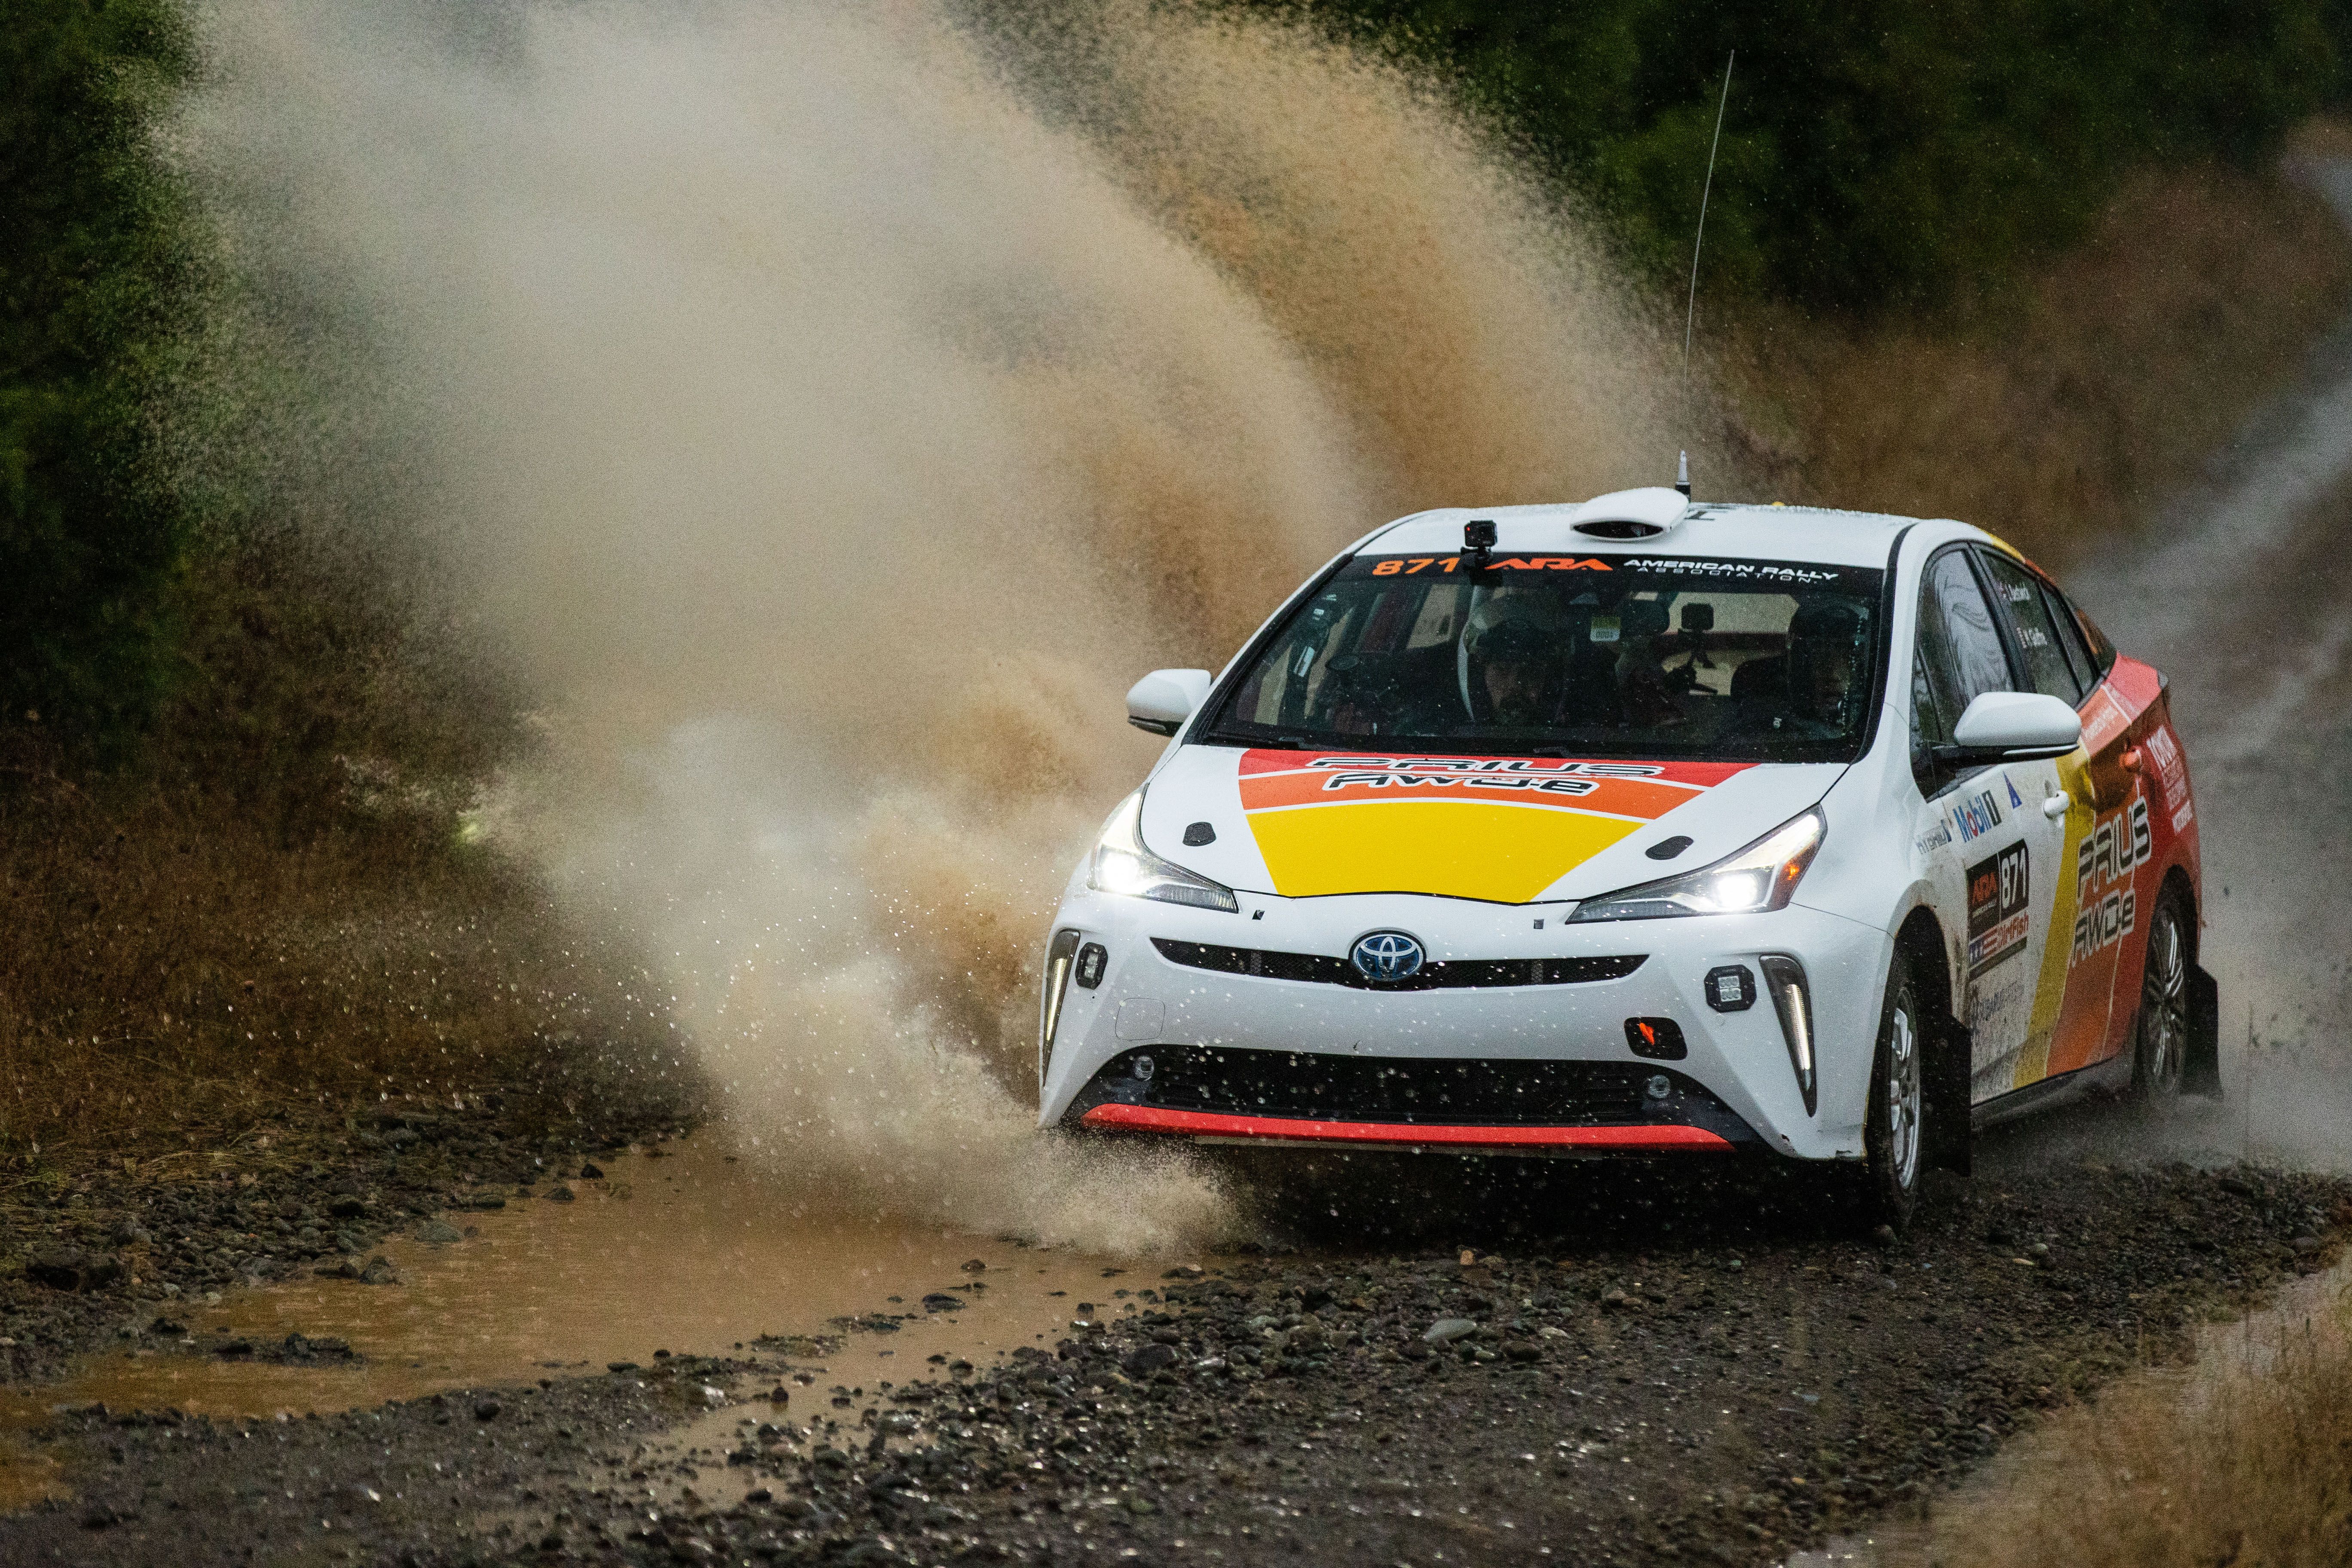 Toyota's Prius Rally Car Gets Down and Dirty